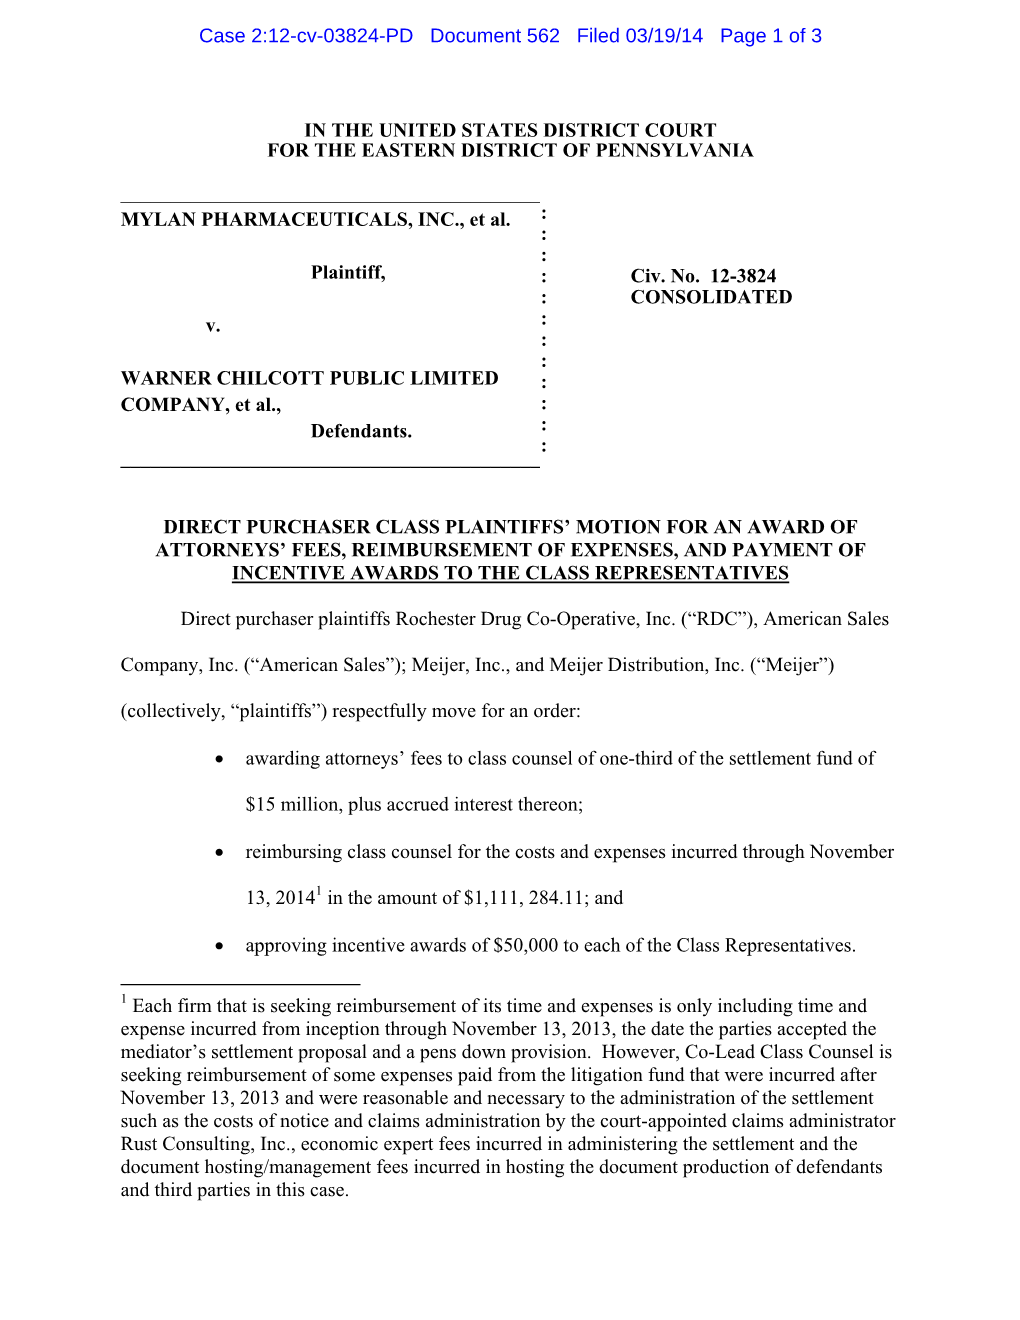 Case 2:12-Cv-03824-PD Document 562 Filed 03/19/14 Page 1 of 3